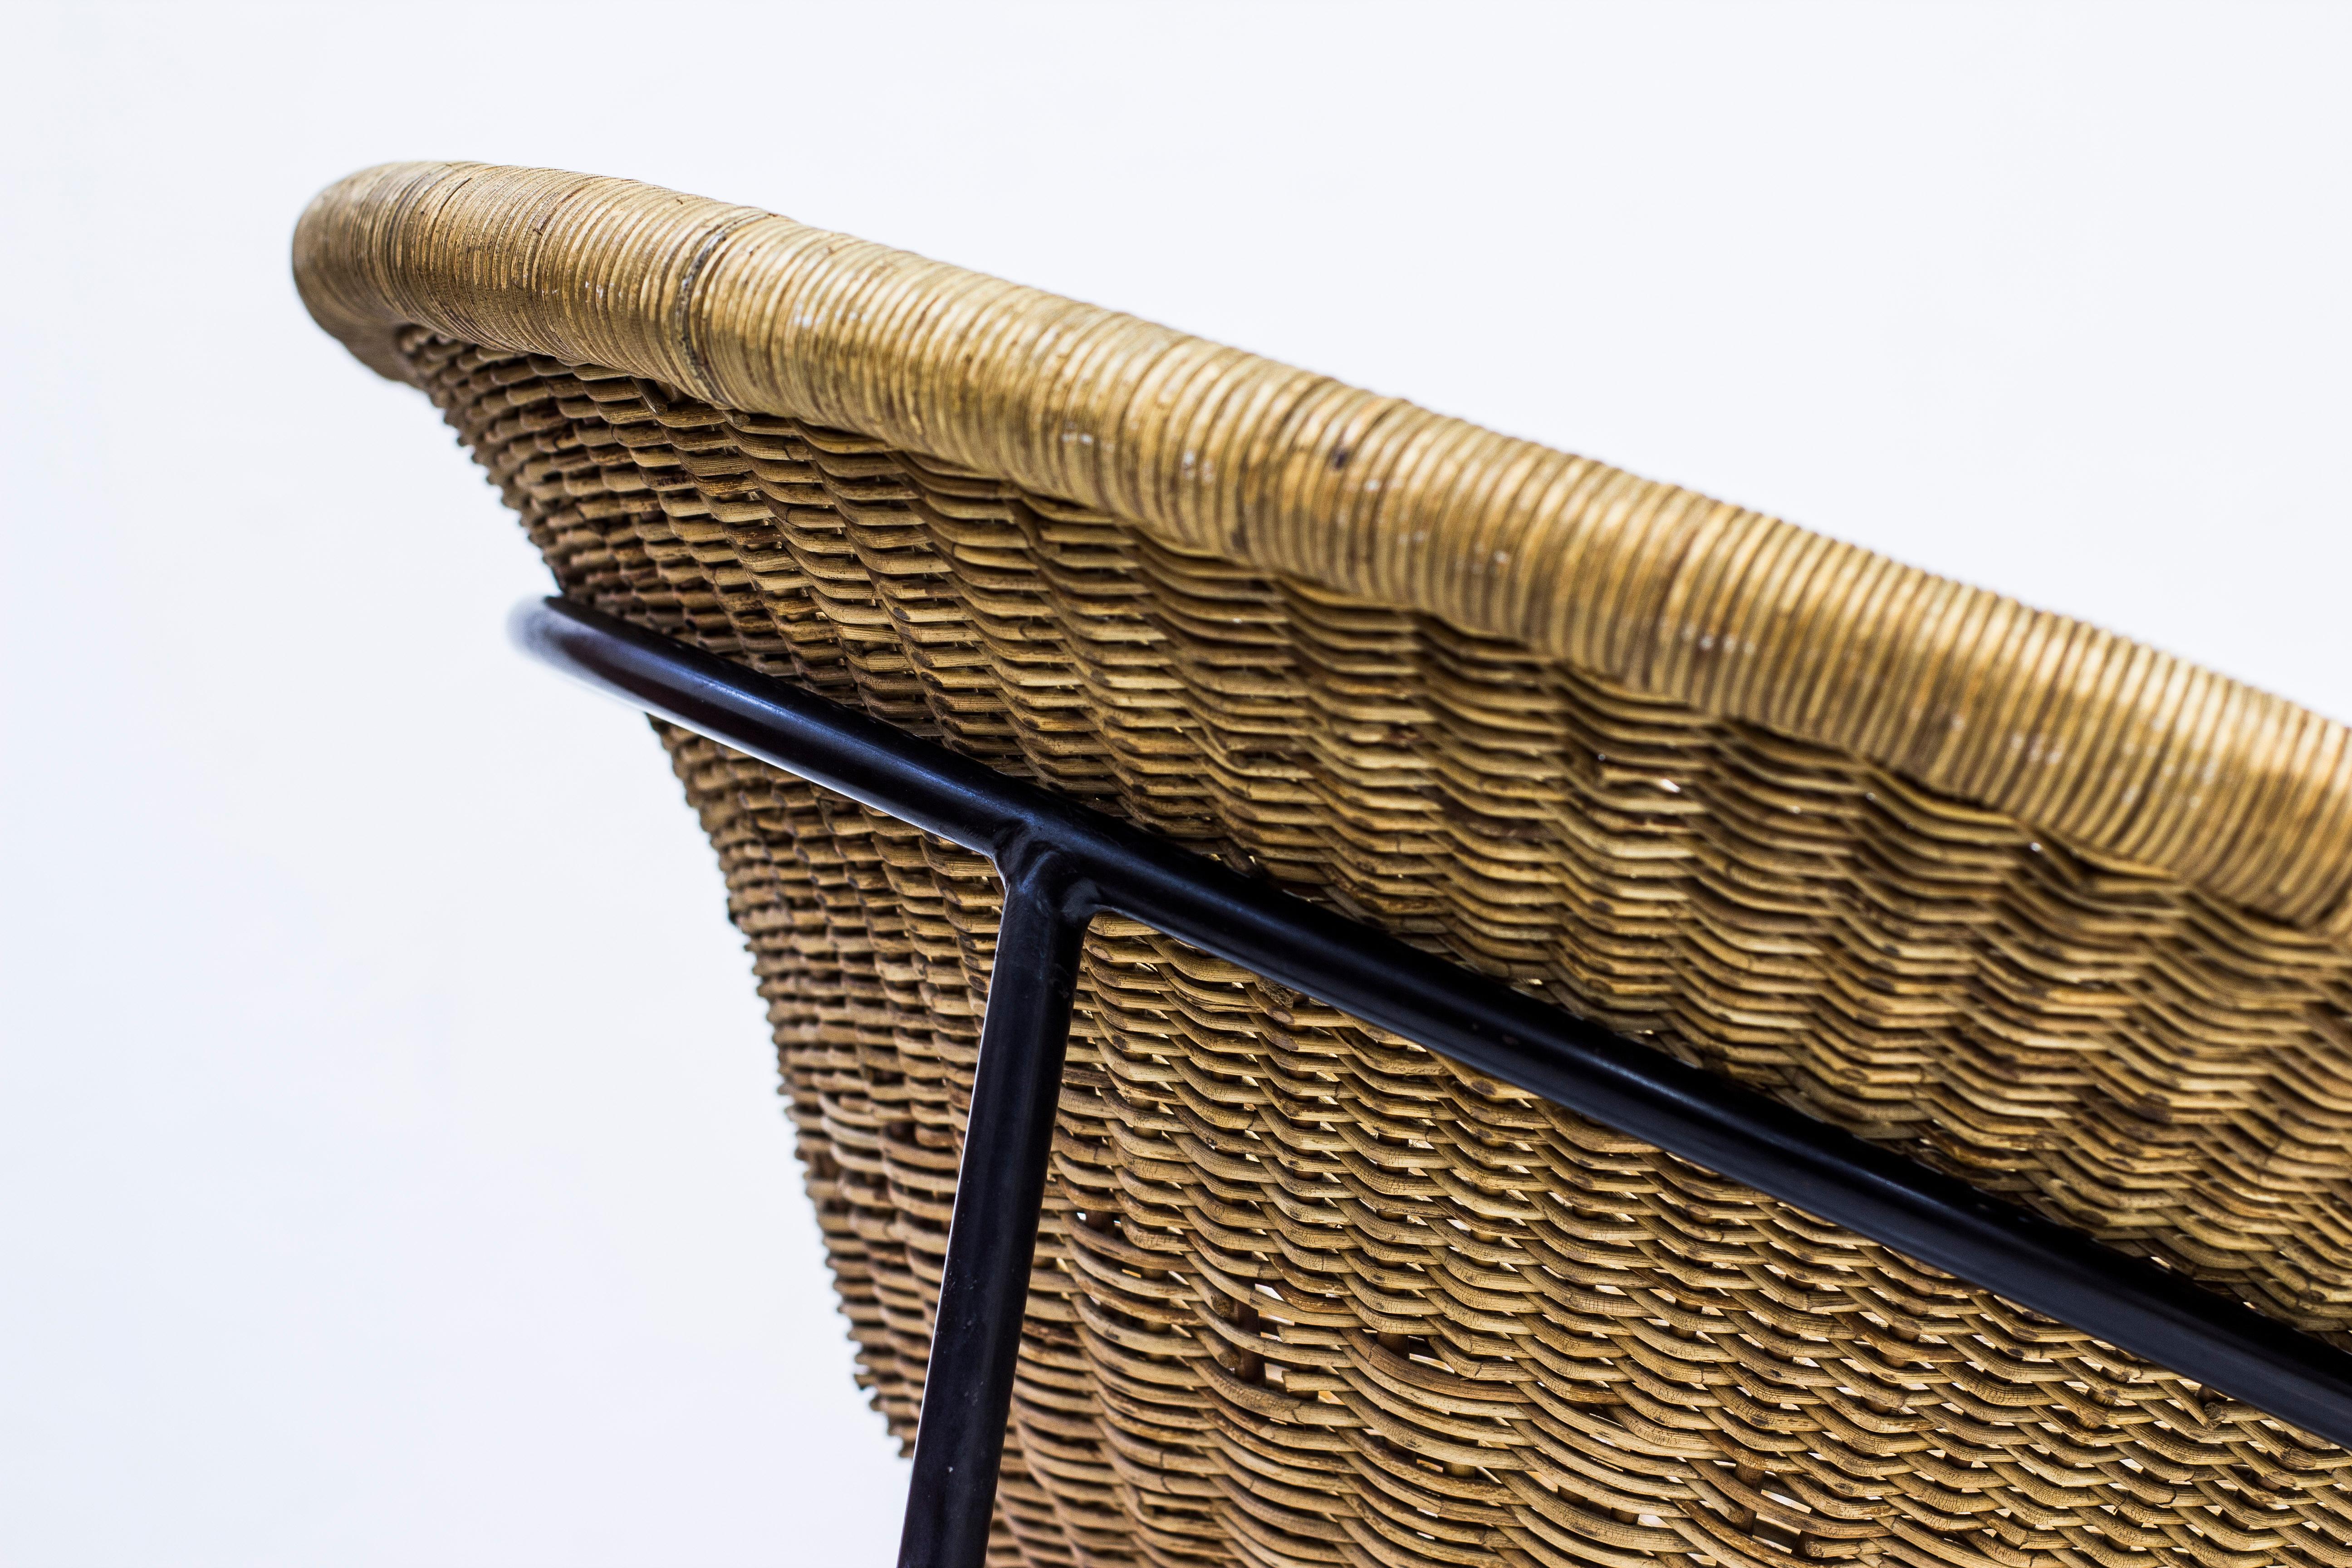 Mid-20th Century Wicker Easy Chair by Sven Staaf, Staaf & Almgren, Sweden, 1950s For Sale